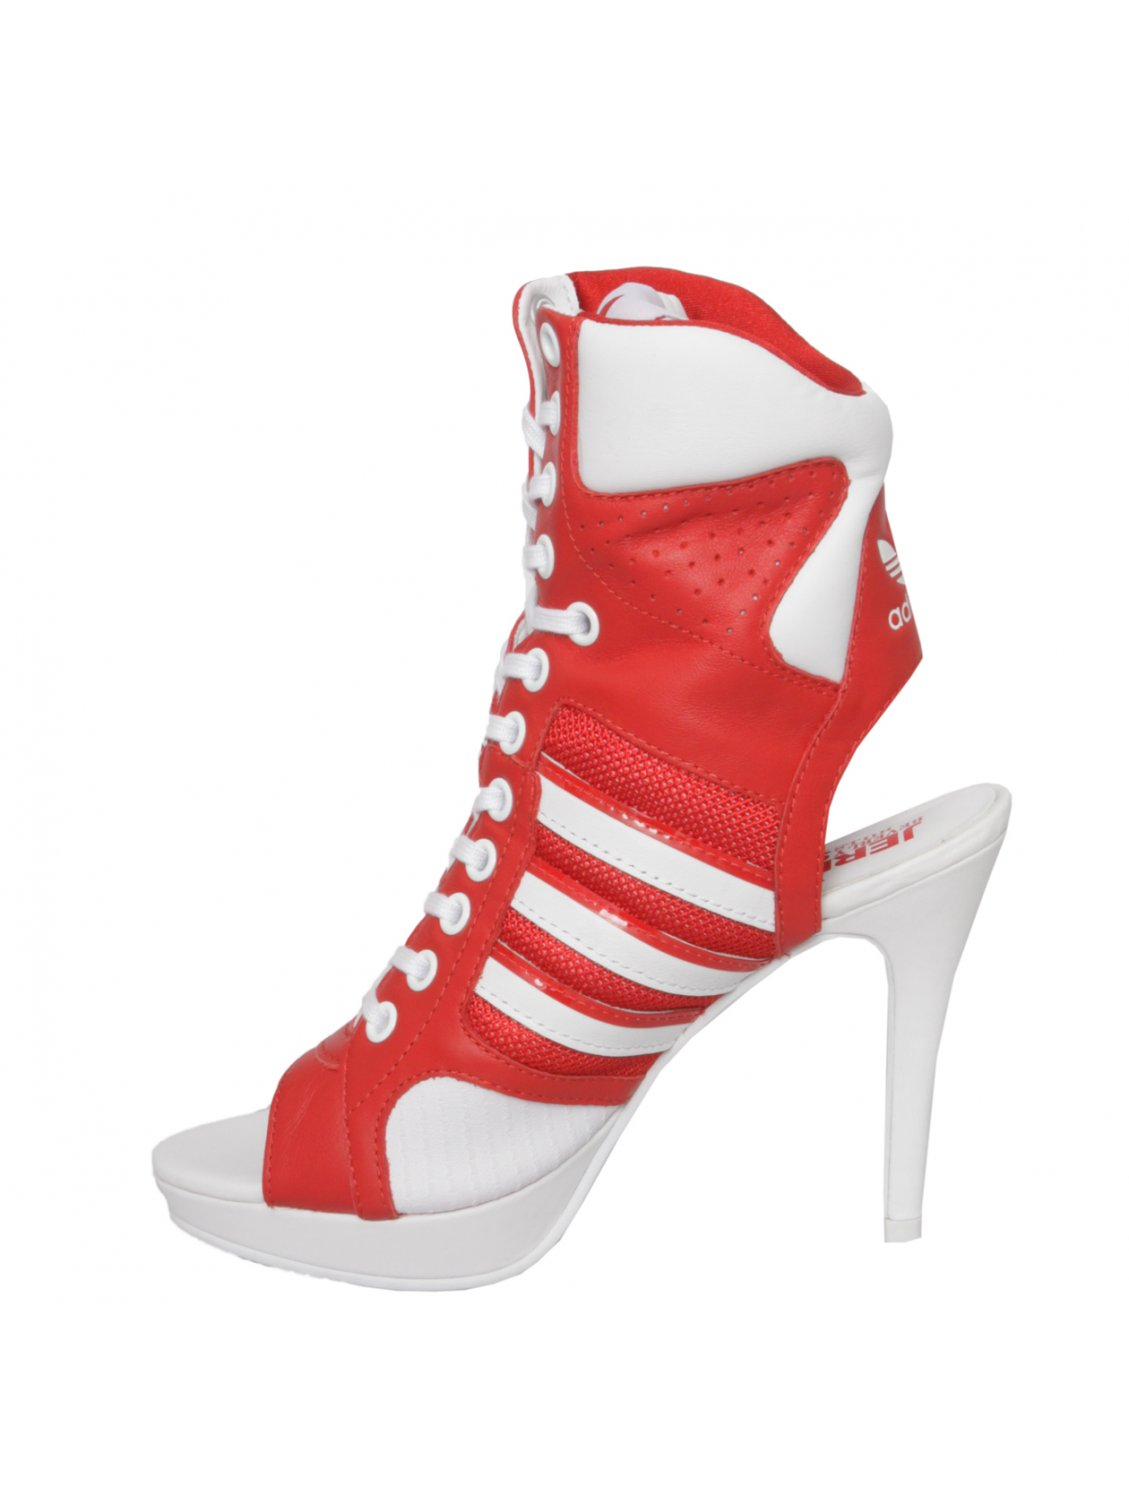 Jeremy Scott for adidas Lace Up High Heels Red | Lyst UK